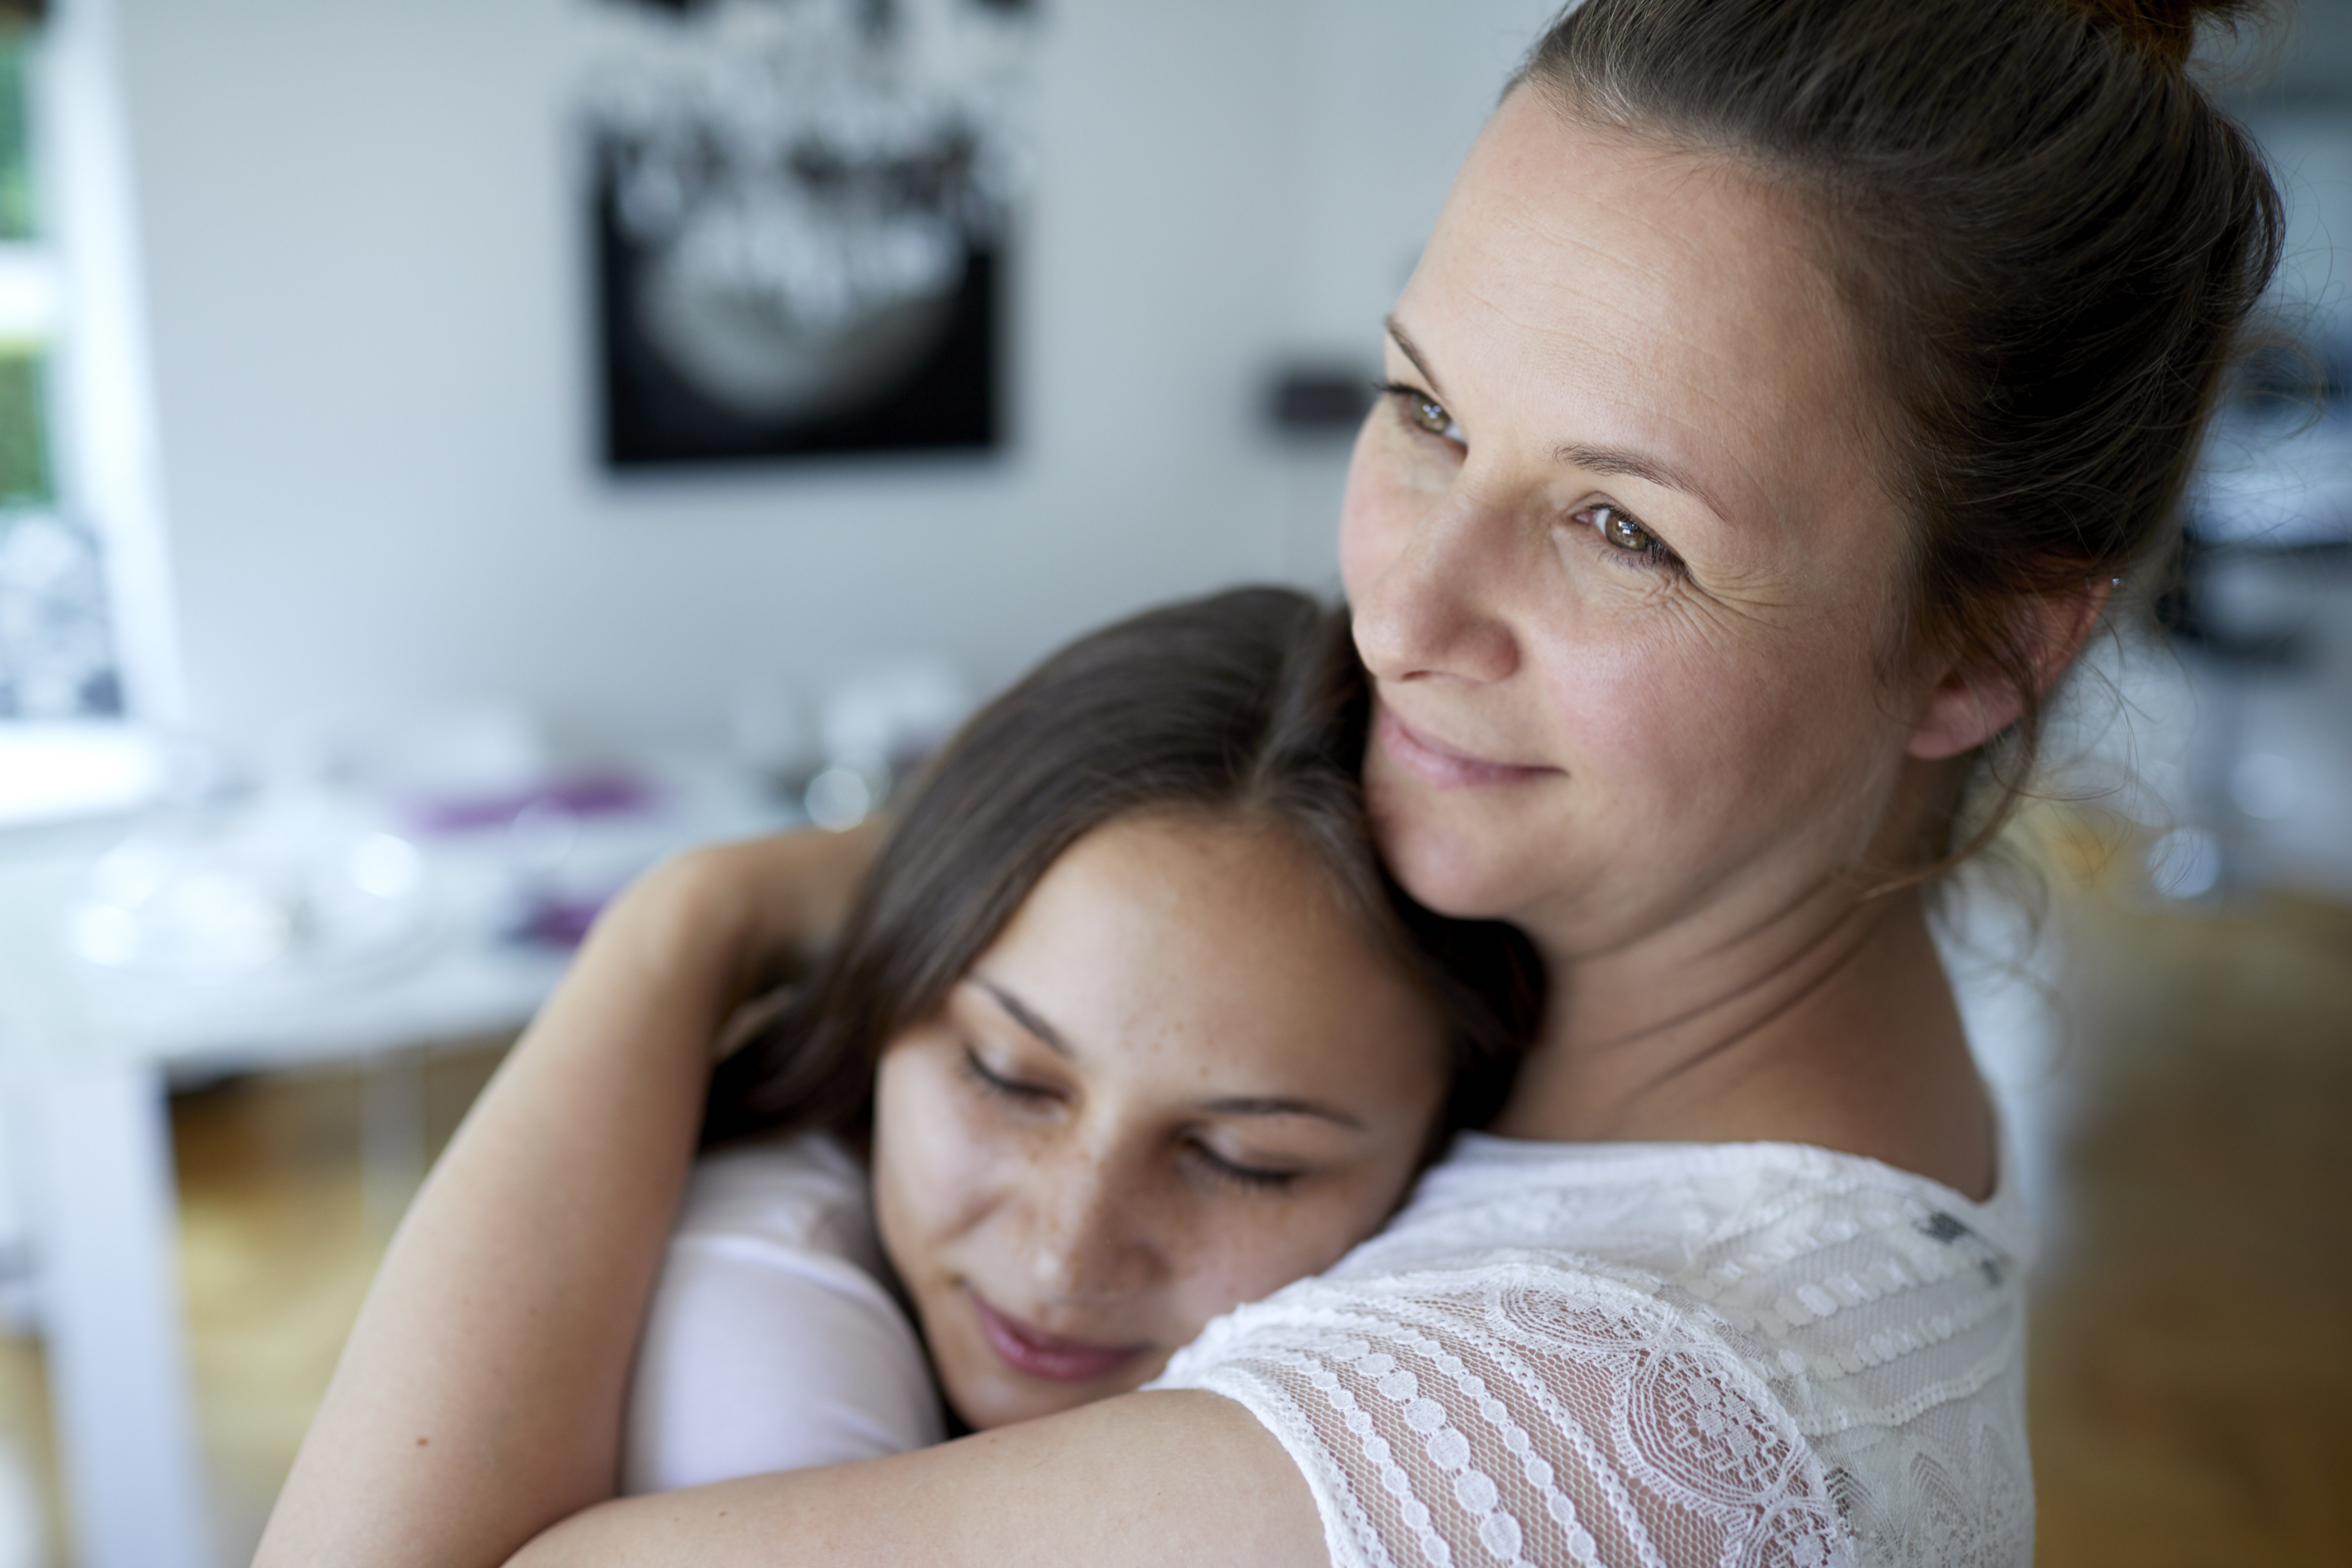 Mother and teenage daughter embracing at home|Photo: Getty Images